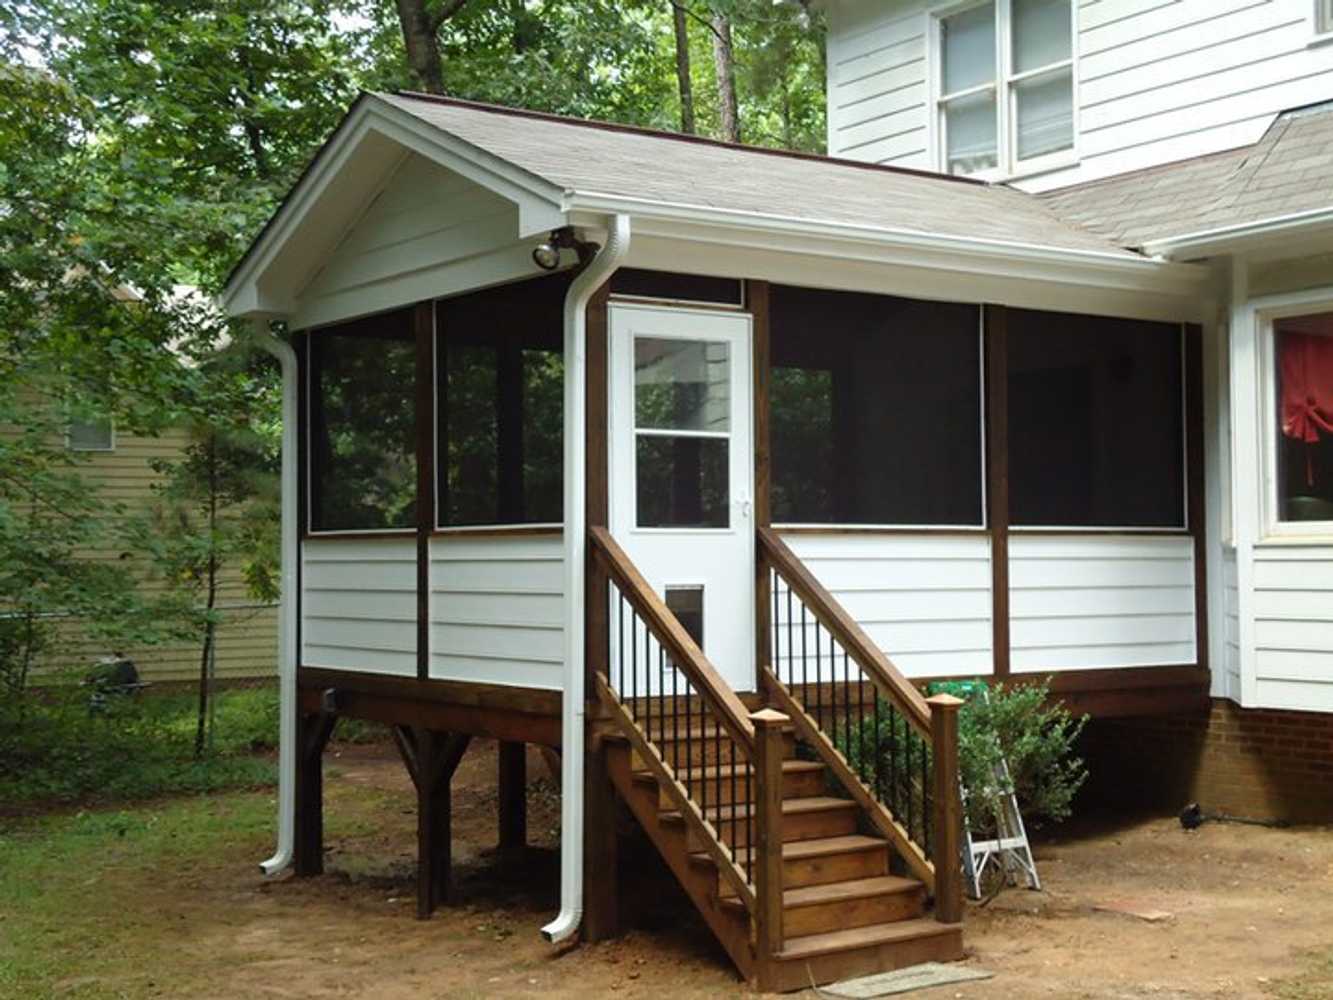 Deck converted to screened porch in Garner. Rotted masonite siding replaced with Hardi Plank.